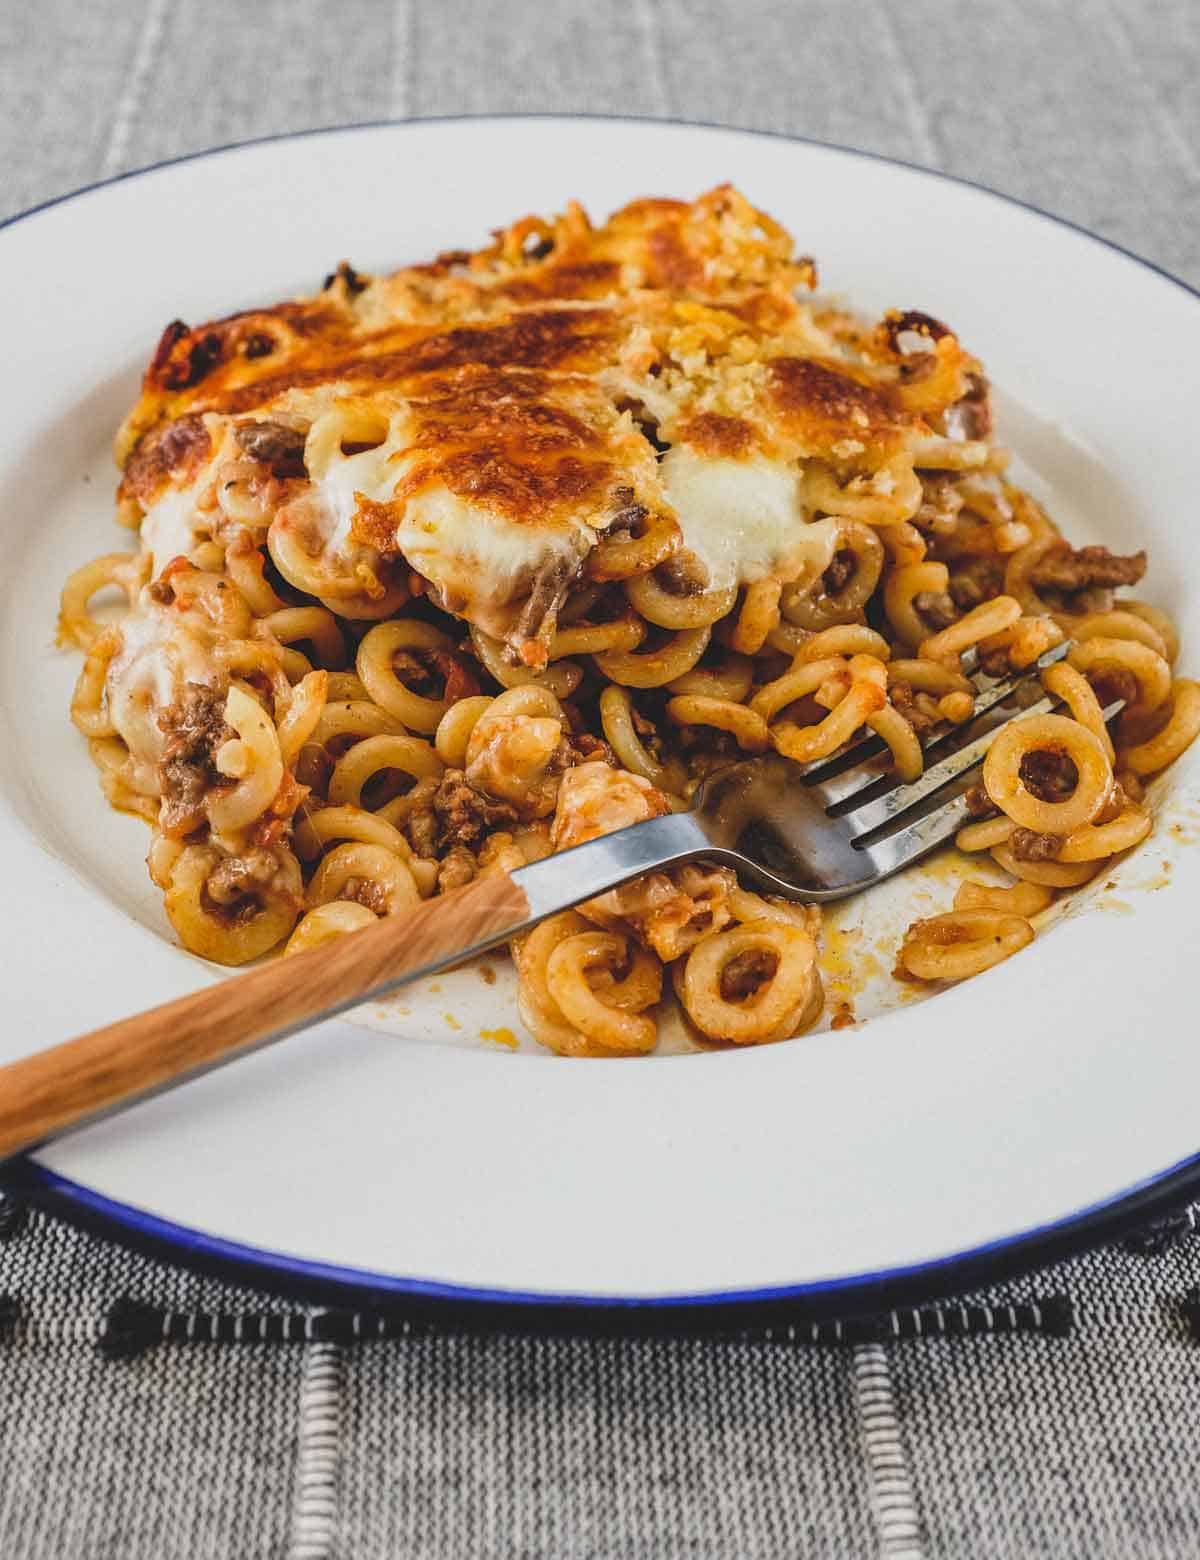 Anelletti Al Forno - baked rings of pasta in a tomato sauce in a bowl with a fork